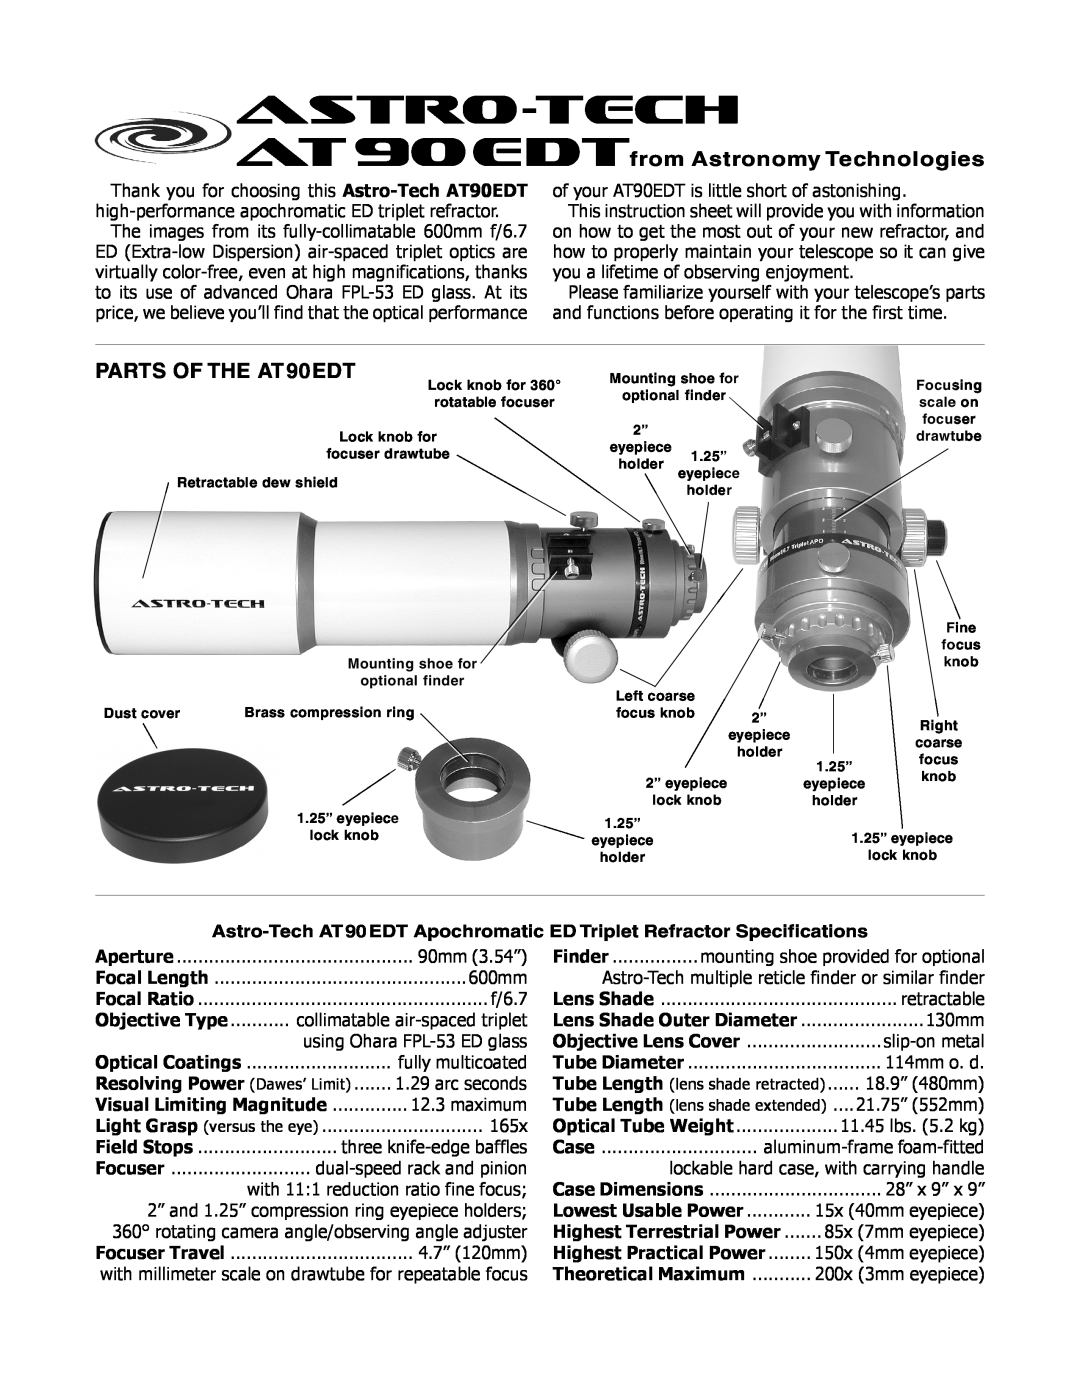 Meade instruction sheet Astro-Tech AT90EDT Apochromatic ED Triplet Refractor Specifications, astro-tech 